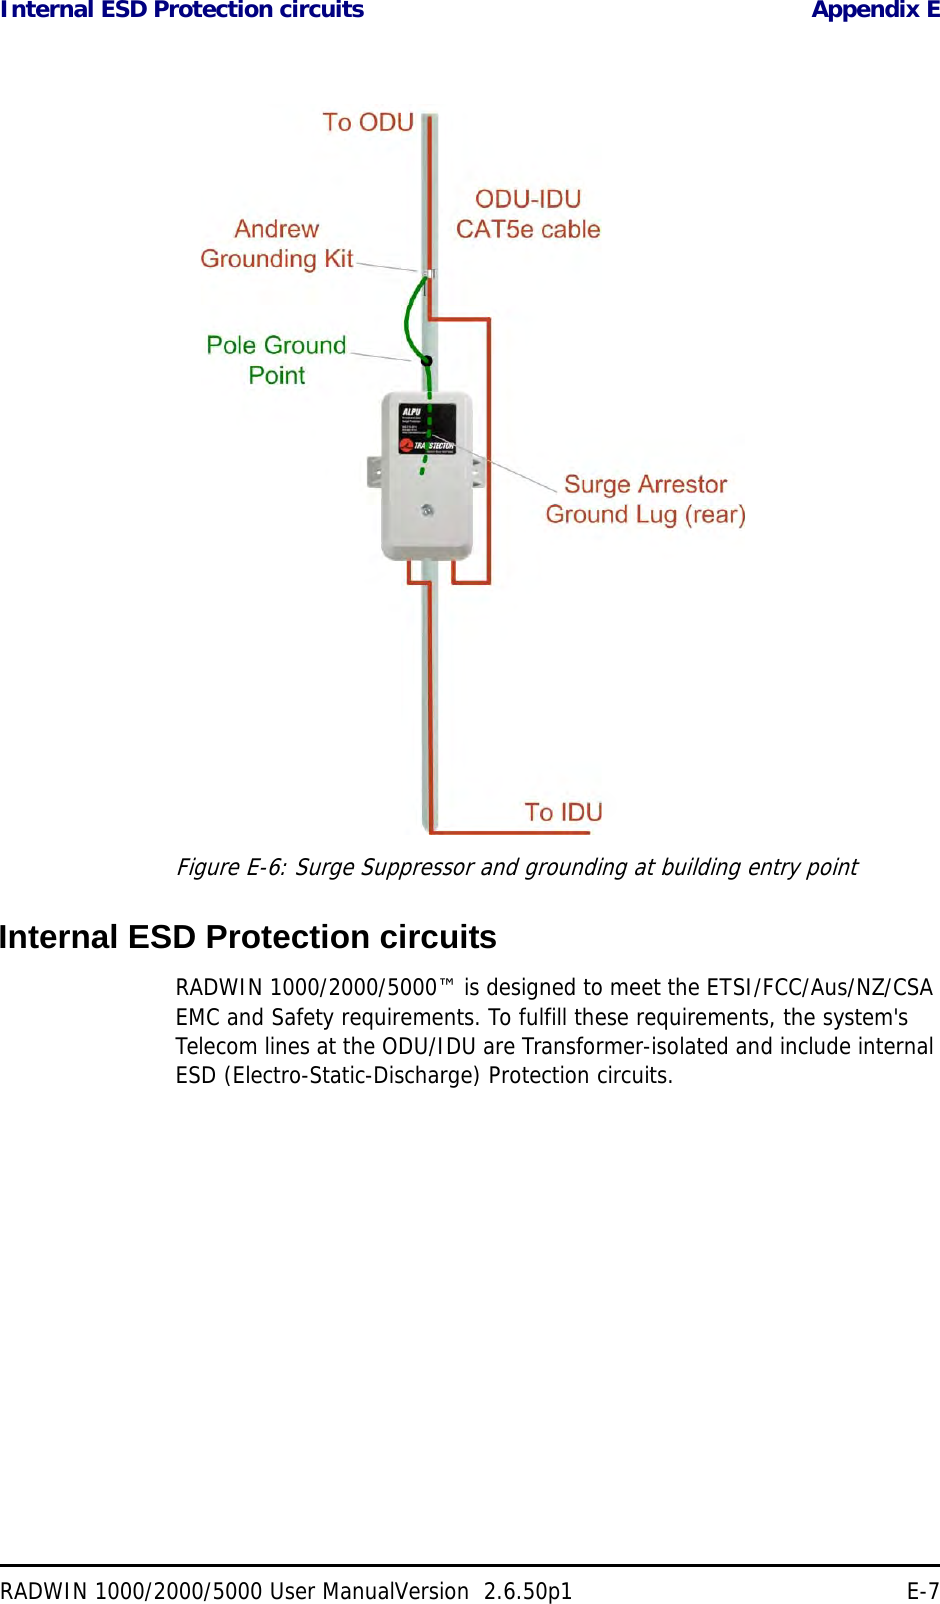 Internal ESD Protection circuits Appendix ERADWIN 1000/2000/5000 User ManualVersion  2.6.50p1 E-7Figure E-6: Surge Suppressor and grounding at building entry pointInternal ESD Protection circuitsRADWIN 1000/2000/5000™ is designed to meet the ETSI/FCC/Aus/NZ/CSA EMC and Safety requirements. To fulfill these requirements, the system&apos;s Telecom lines at the ODU/IDU are Transformer-isolated and include internal ESD (Electro-Static-Discharge) Protection circuits.